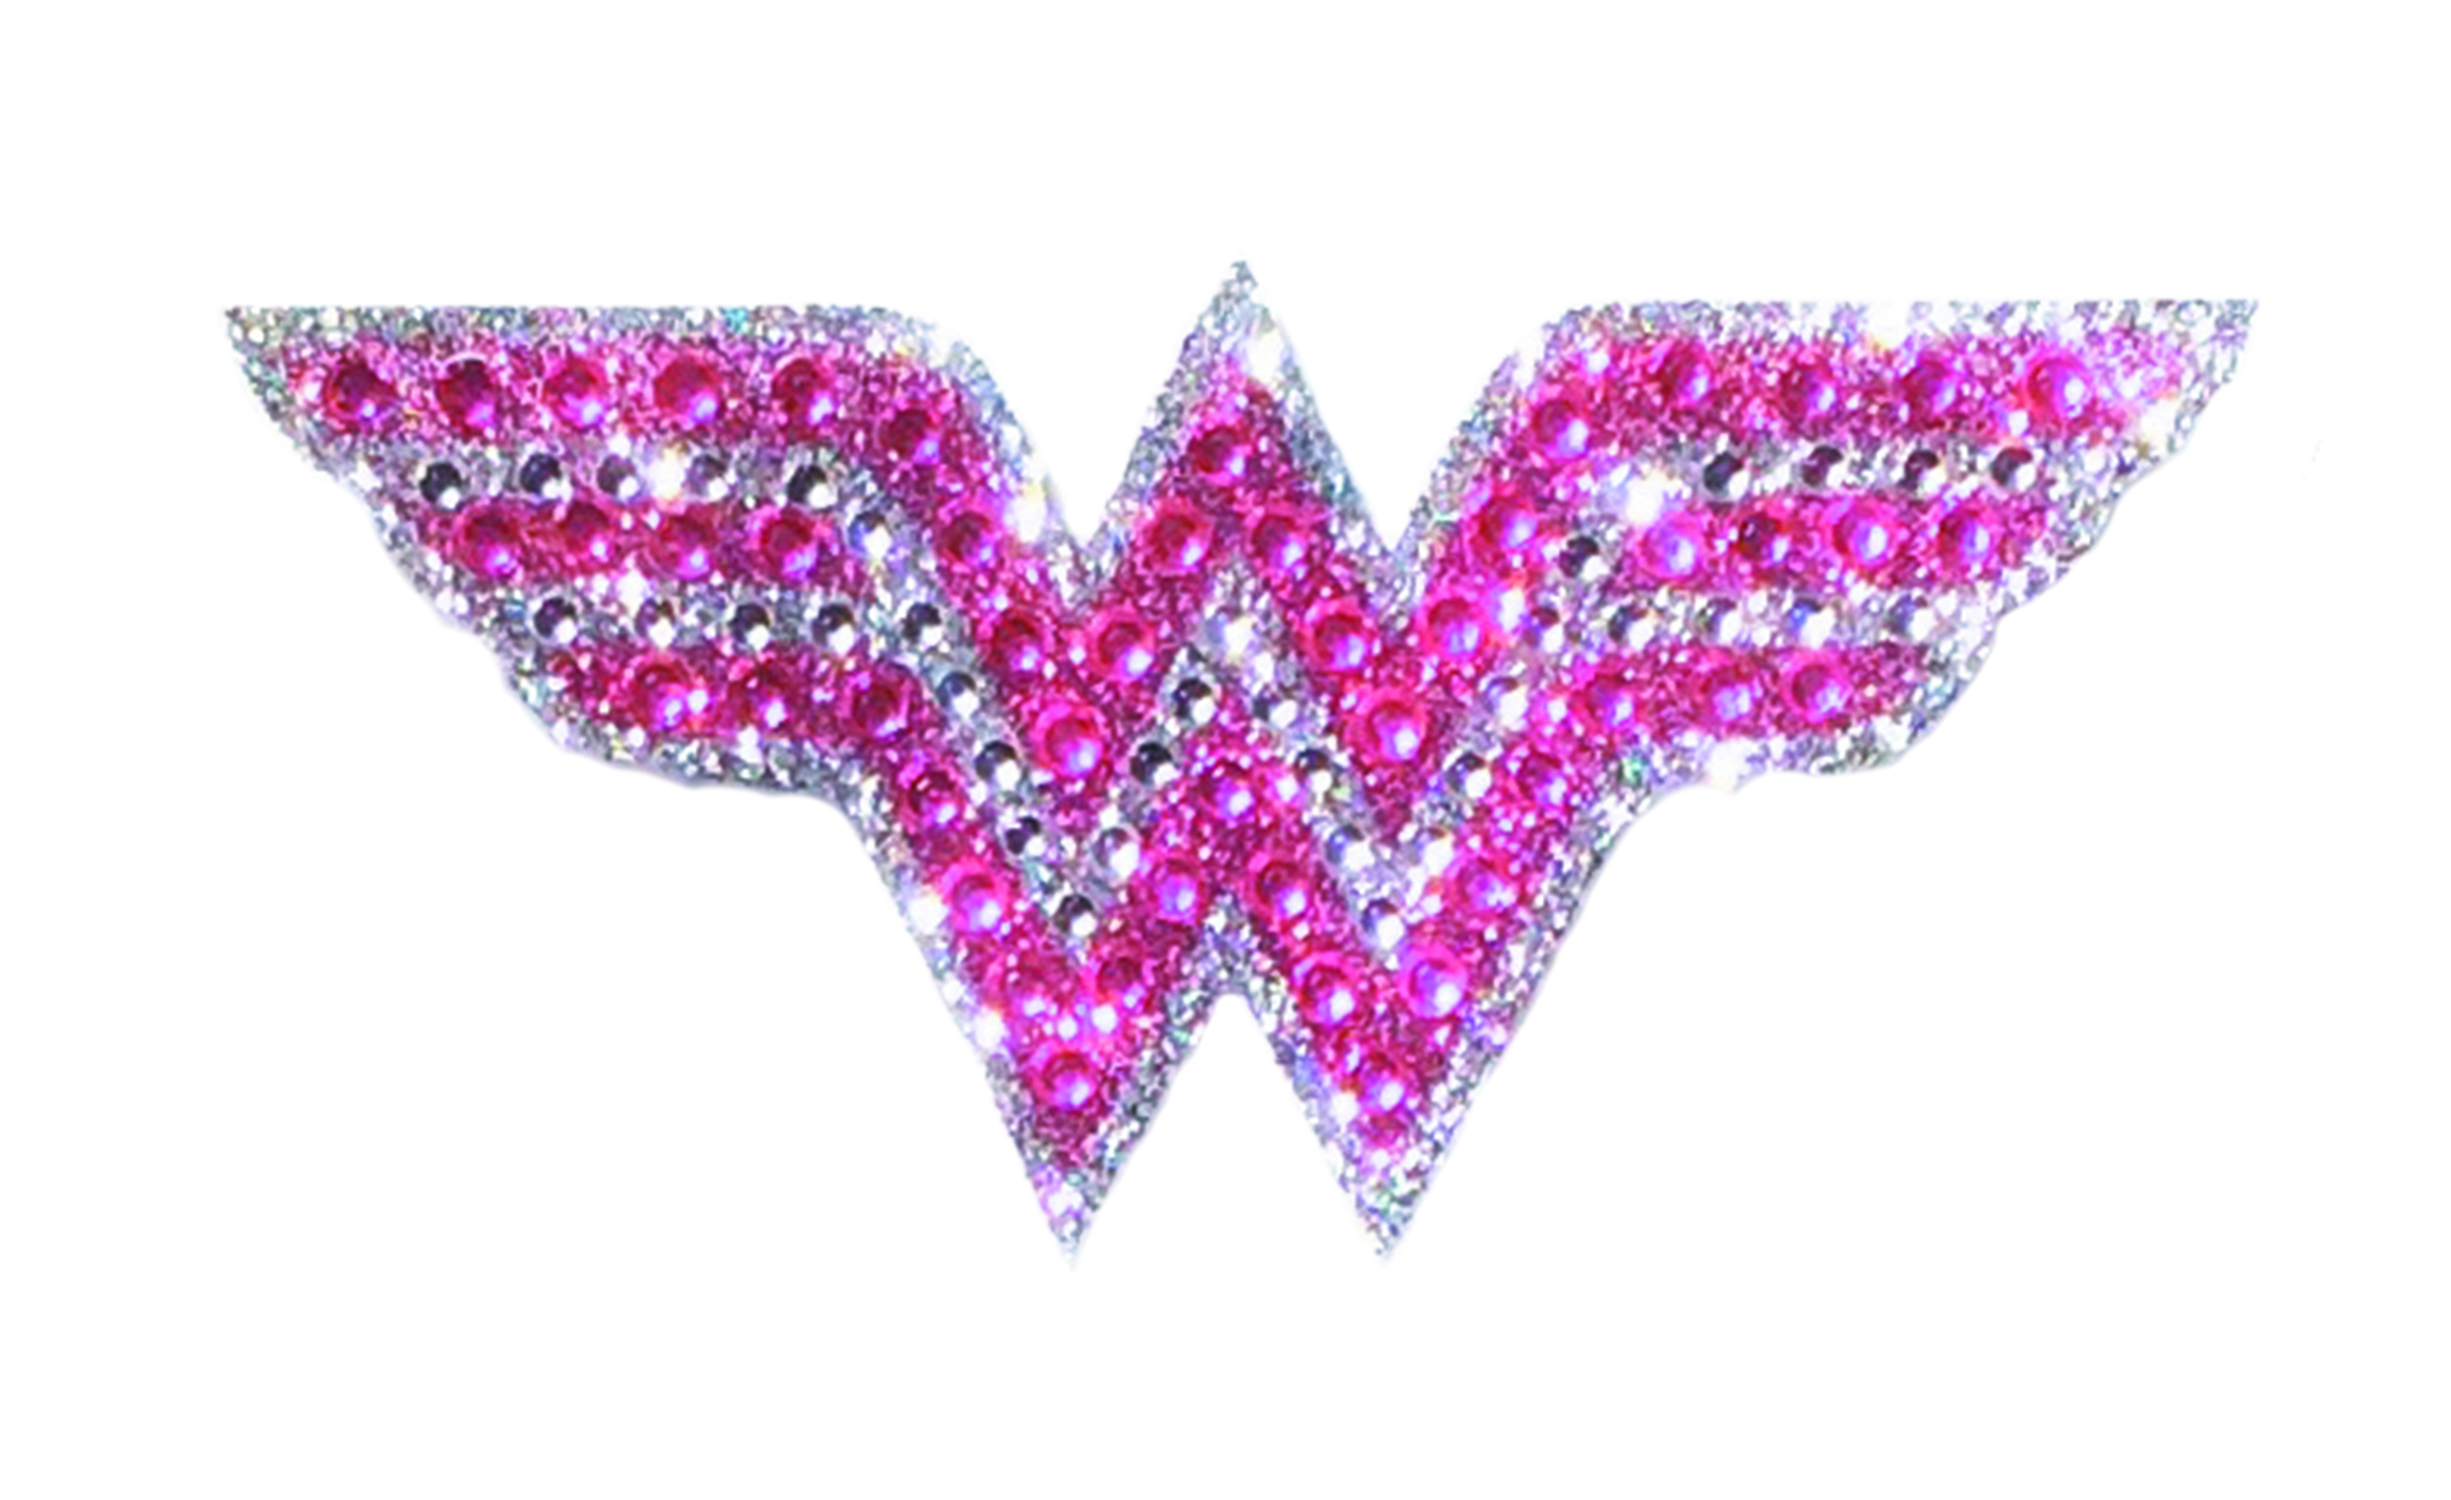 DC HEROES CRYSTAL WONDER WOMAN PINK LOGO SMALL DECAL